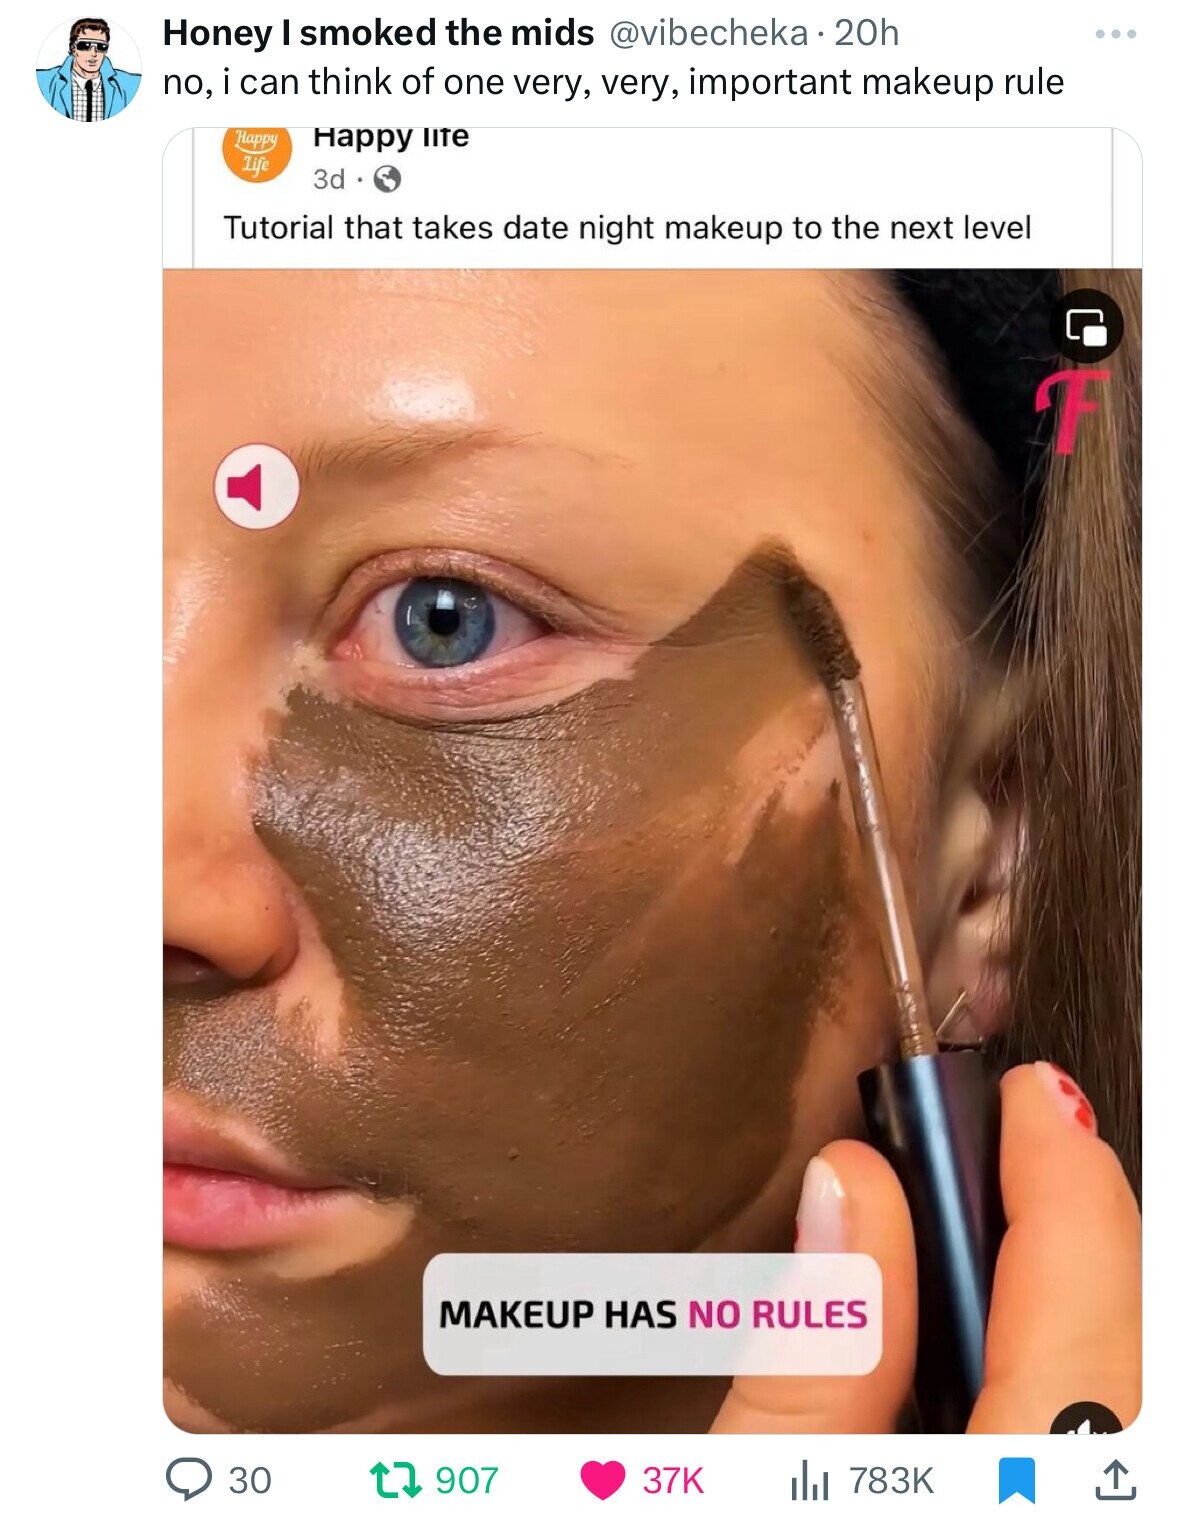 head - Honey I smoked the mids . 20h no, i can think of one very, very, important makeup rule Happy life 3d Tutorial that takes date night makeup to the next level Happy Life 30 Makeup Has No Rules